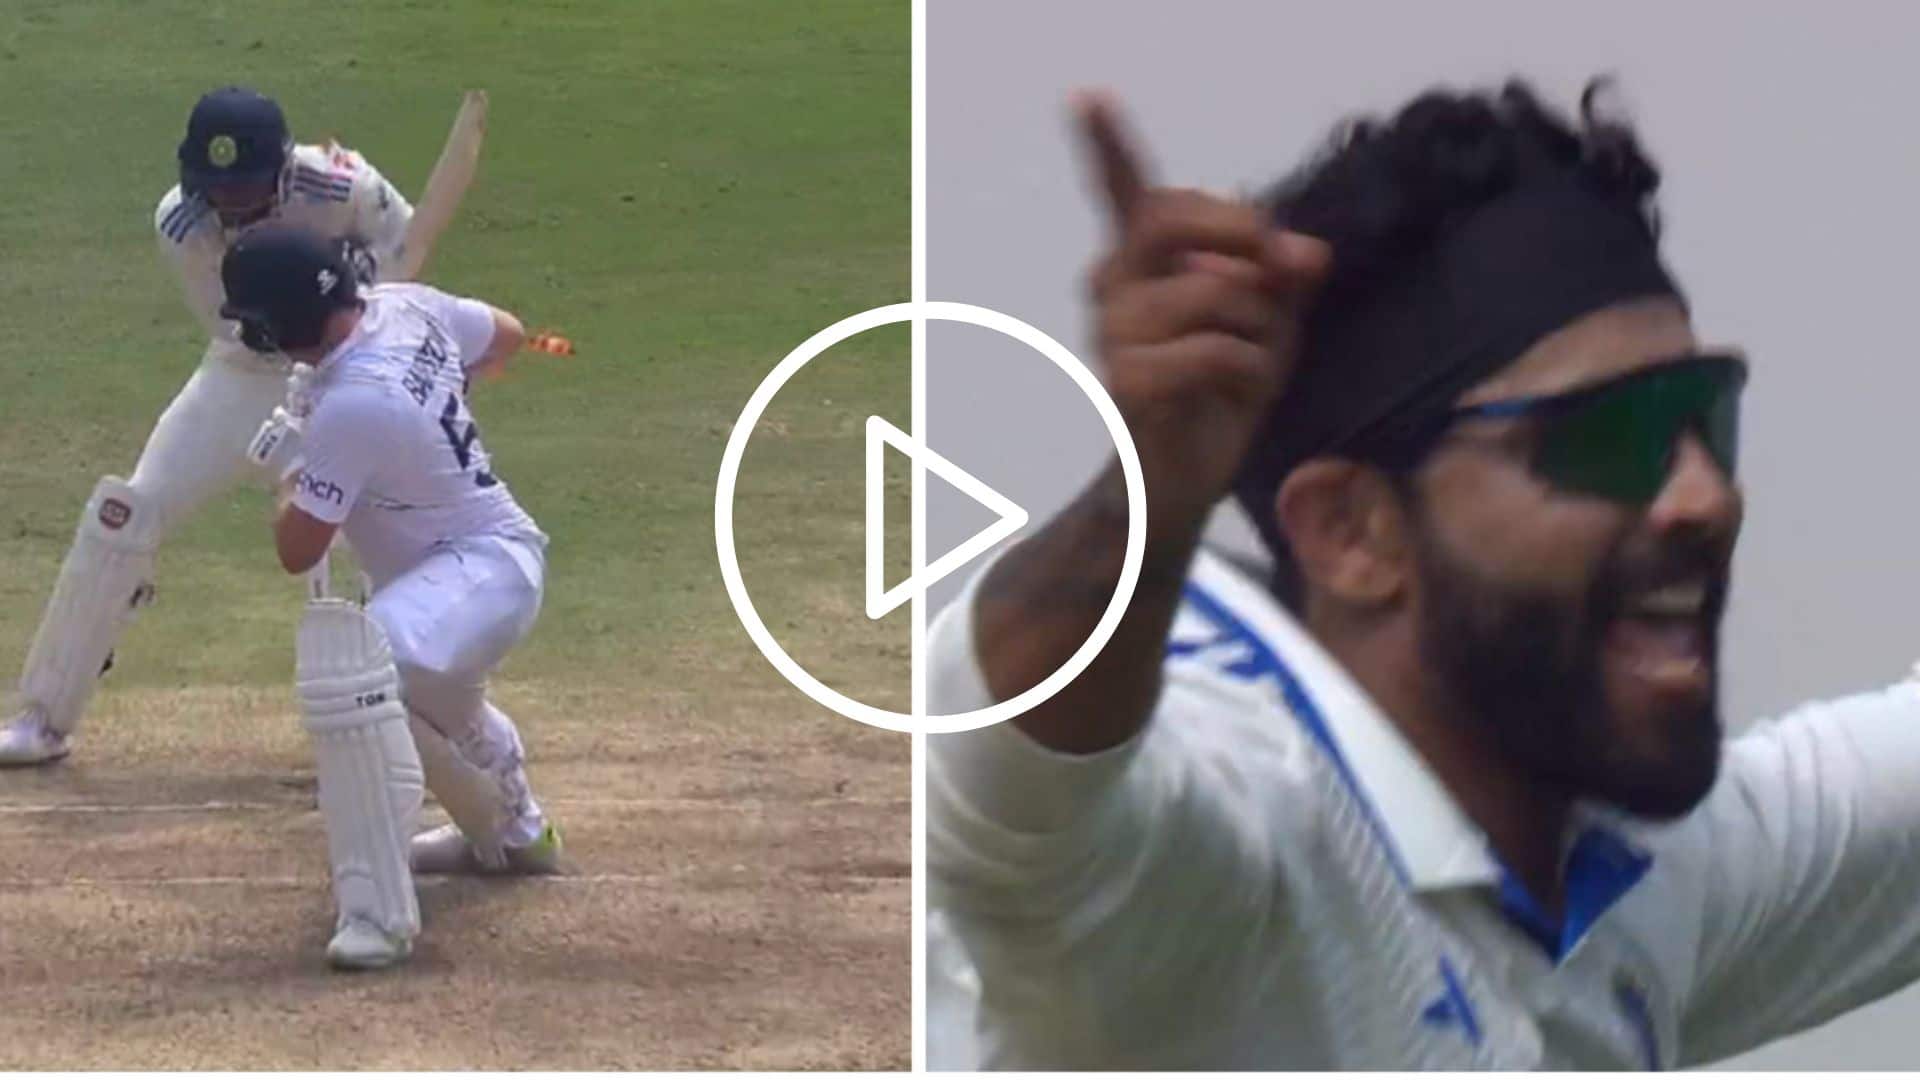 [Watch] Ravindra Jadeja Cleans Up Bairstow After A 'Horrible Leave' From Englishman